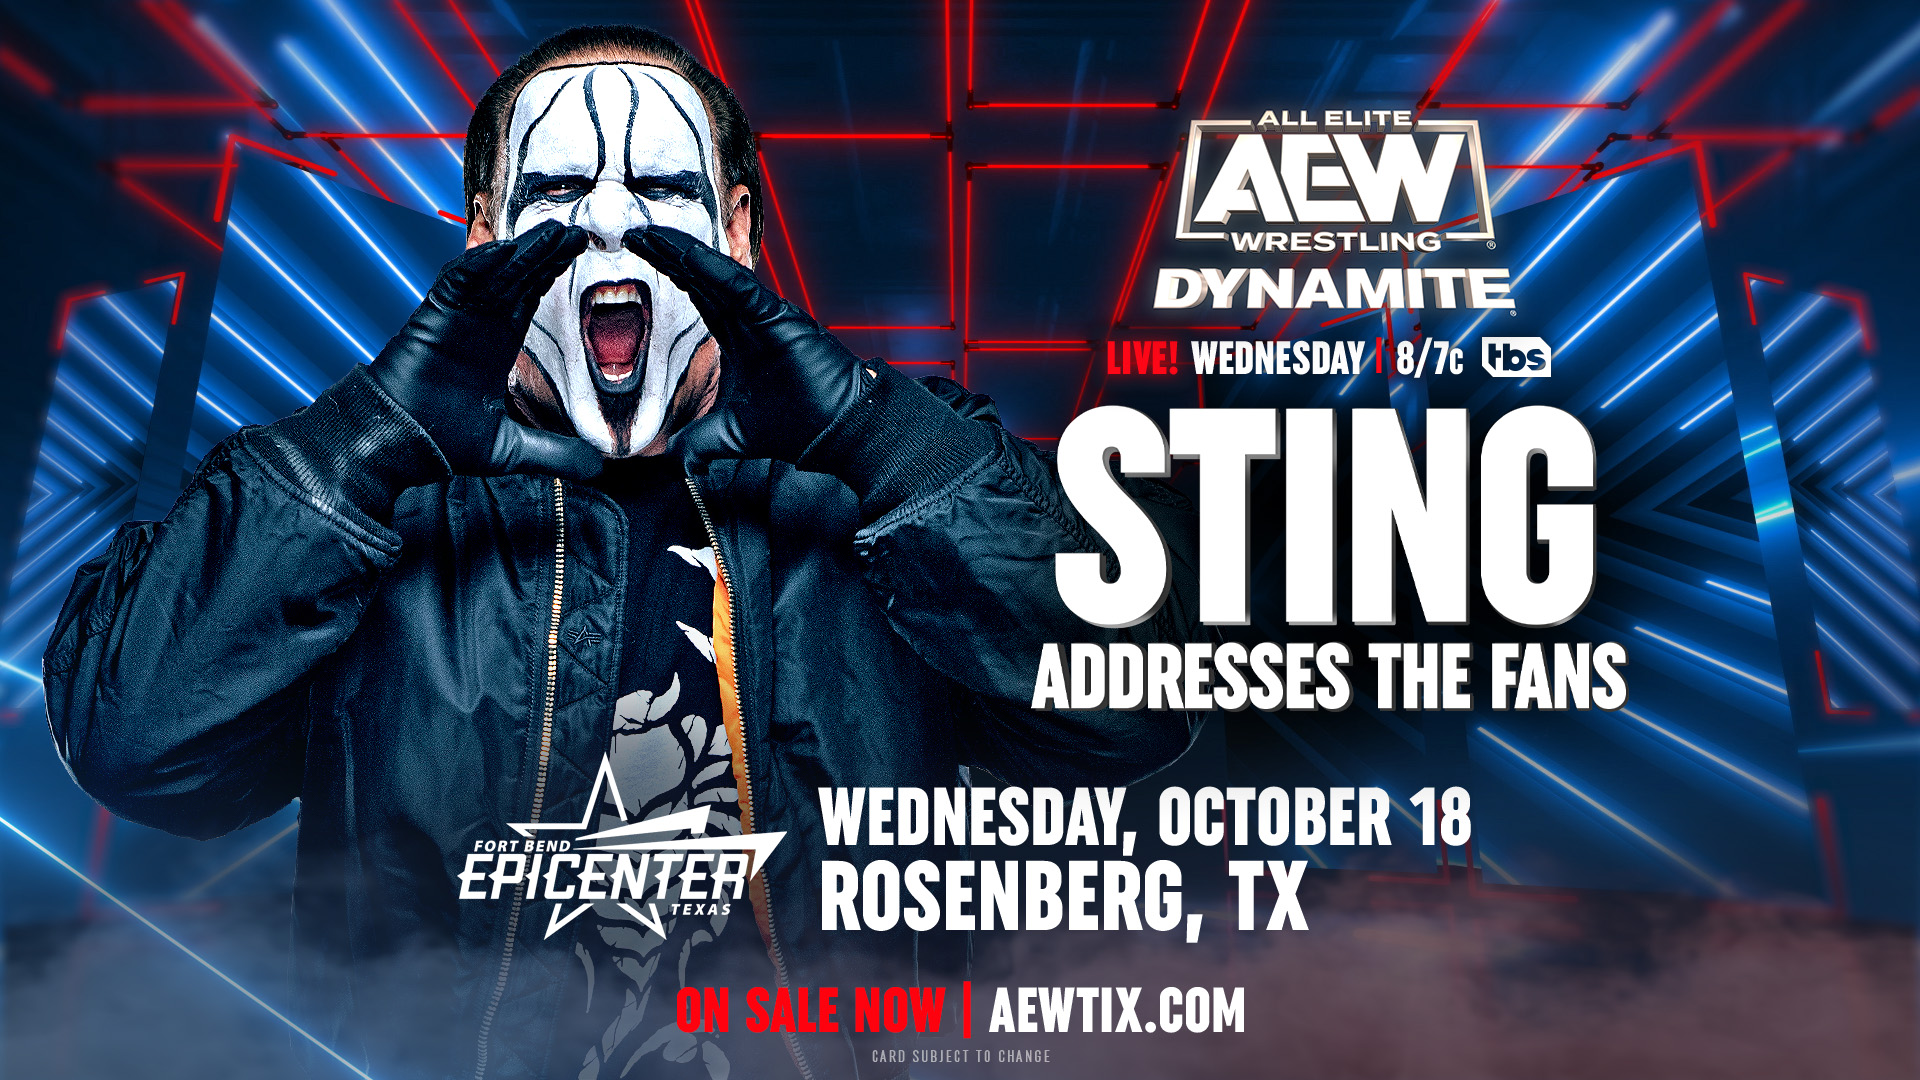 AEW Dynamite Sting Addresses the fans image